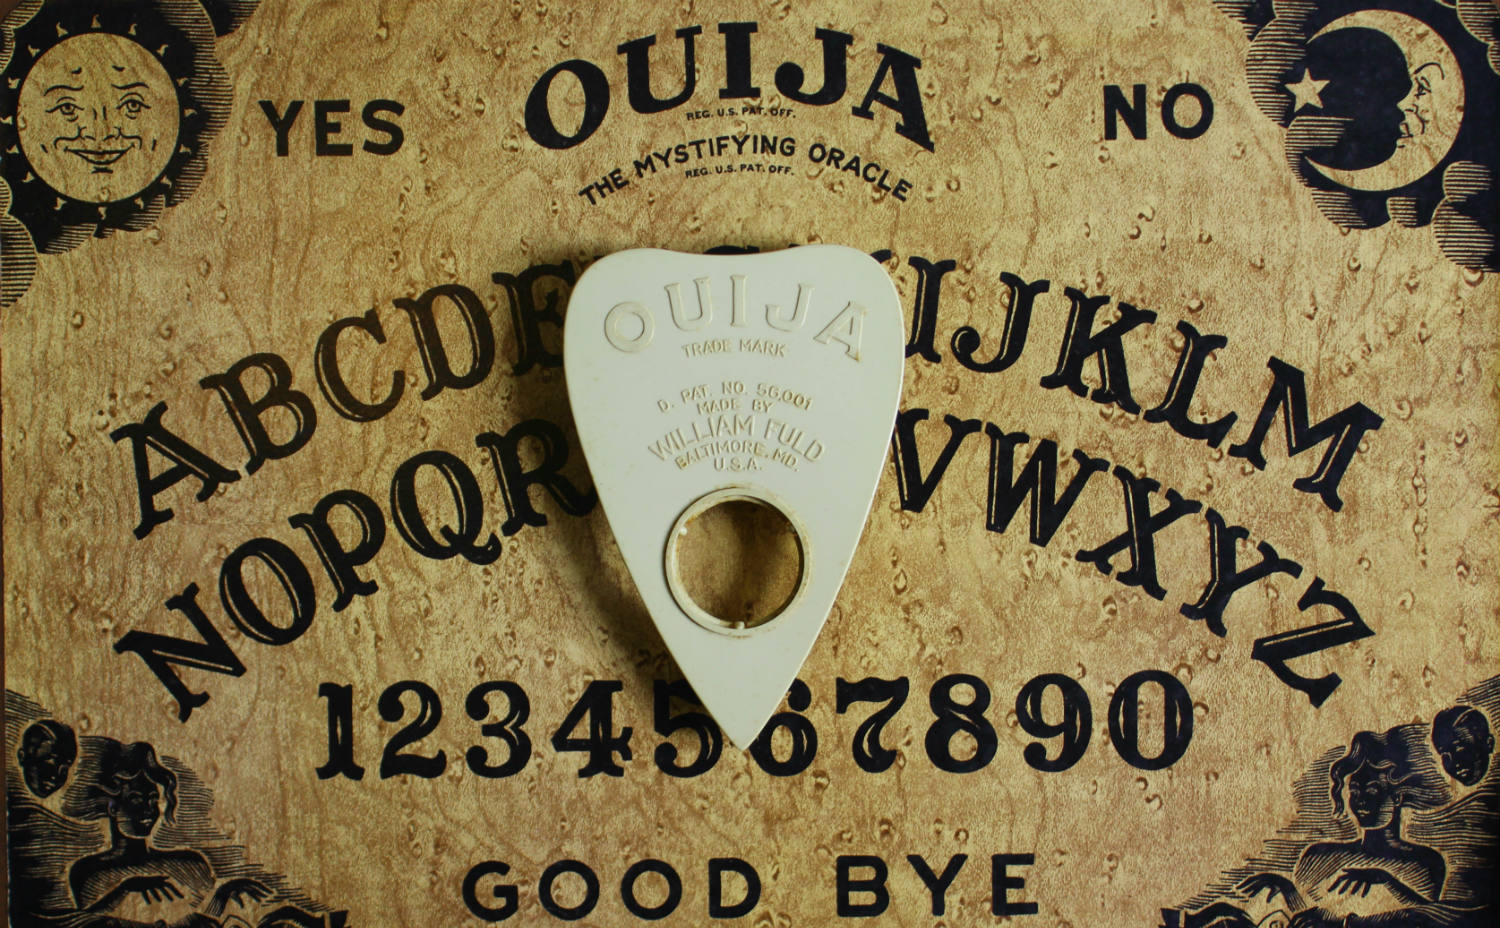 A Ouija Board Collection in Schenectady - Exploring Upstate